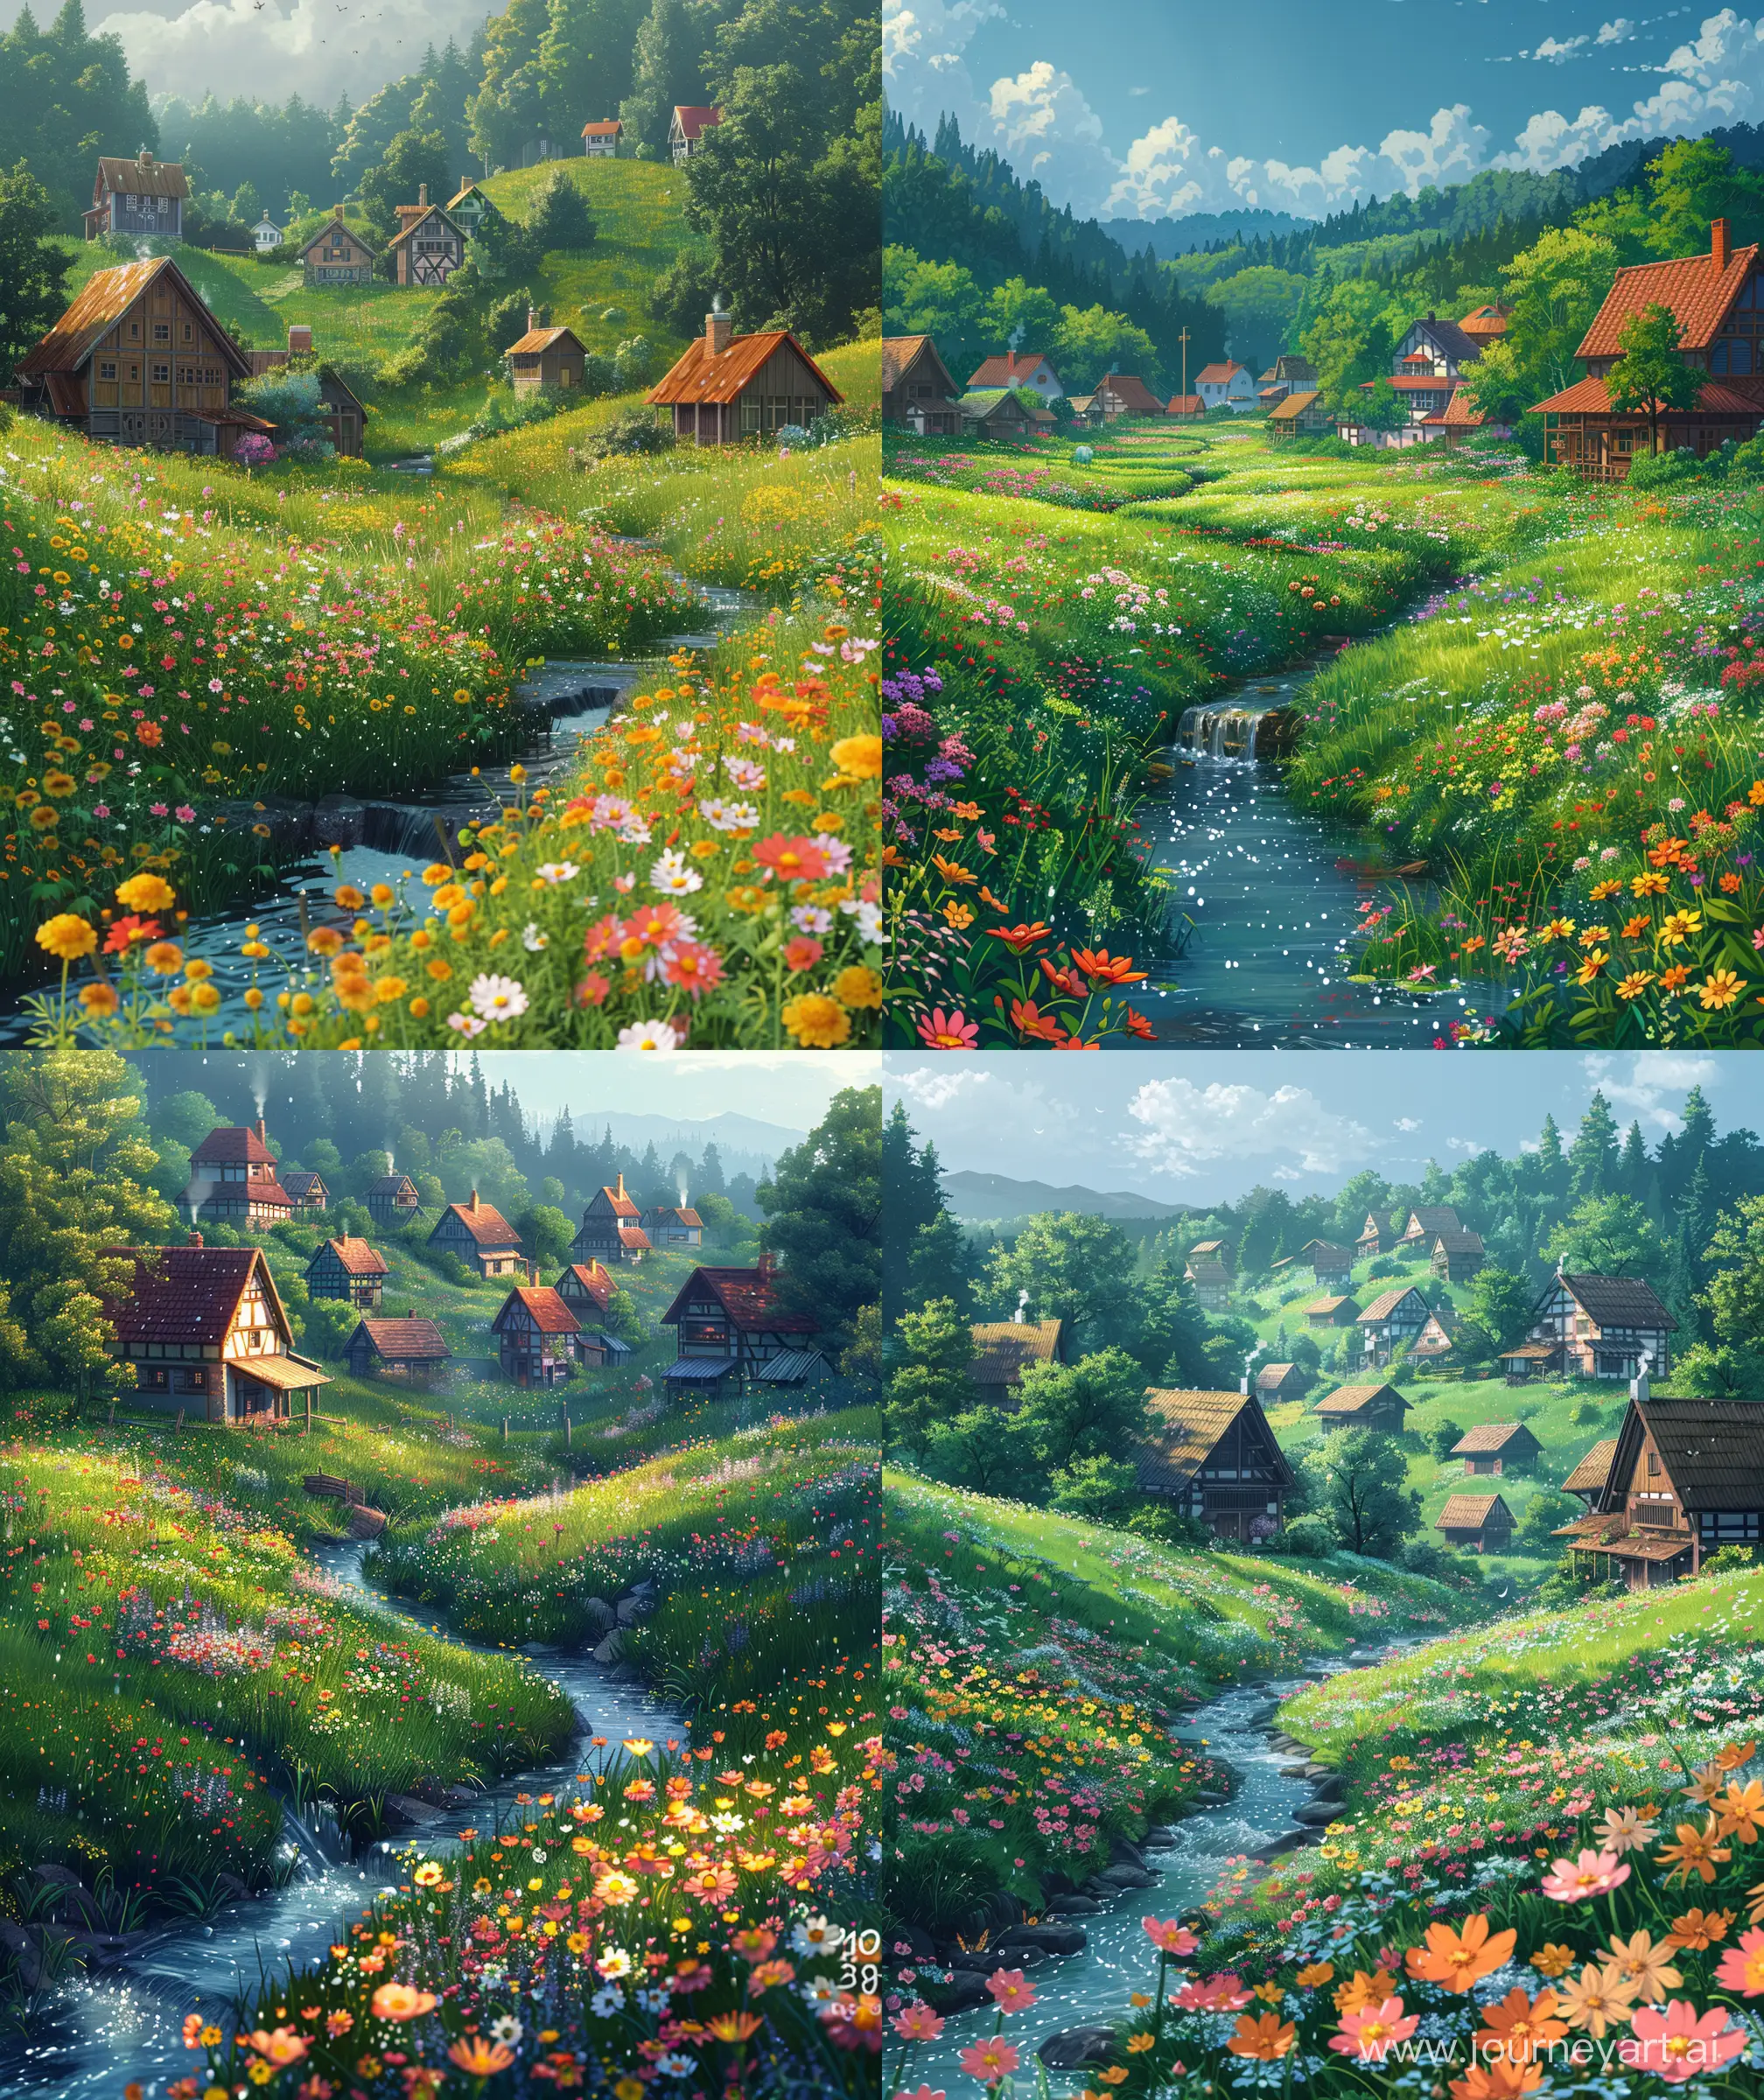 Tranquil-GhibliStyle-Anime-Countryside-Serene-Morning-with-Flowers-and-Stream